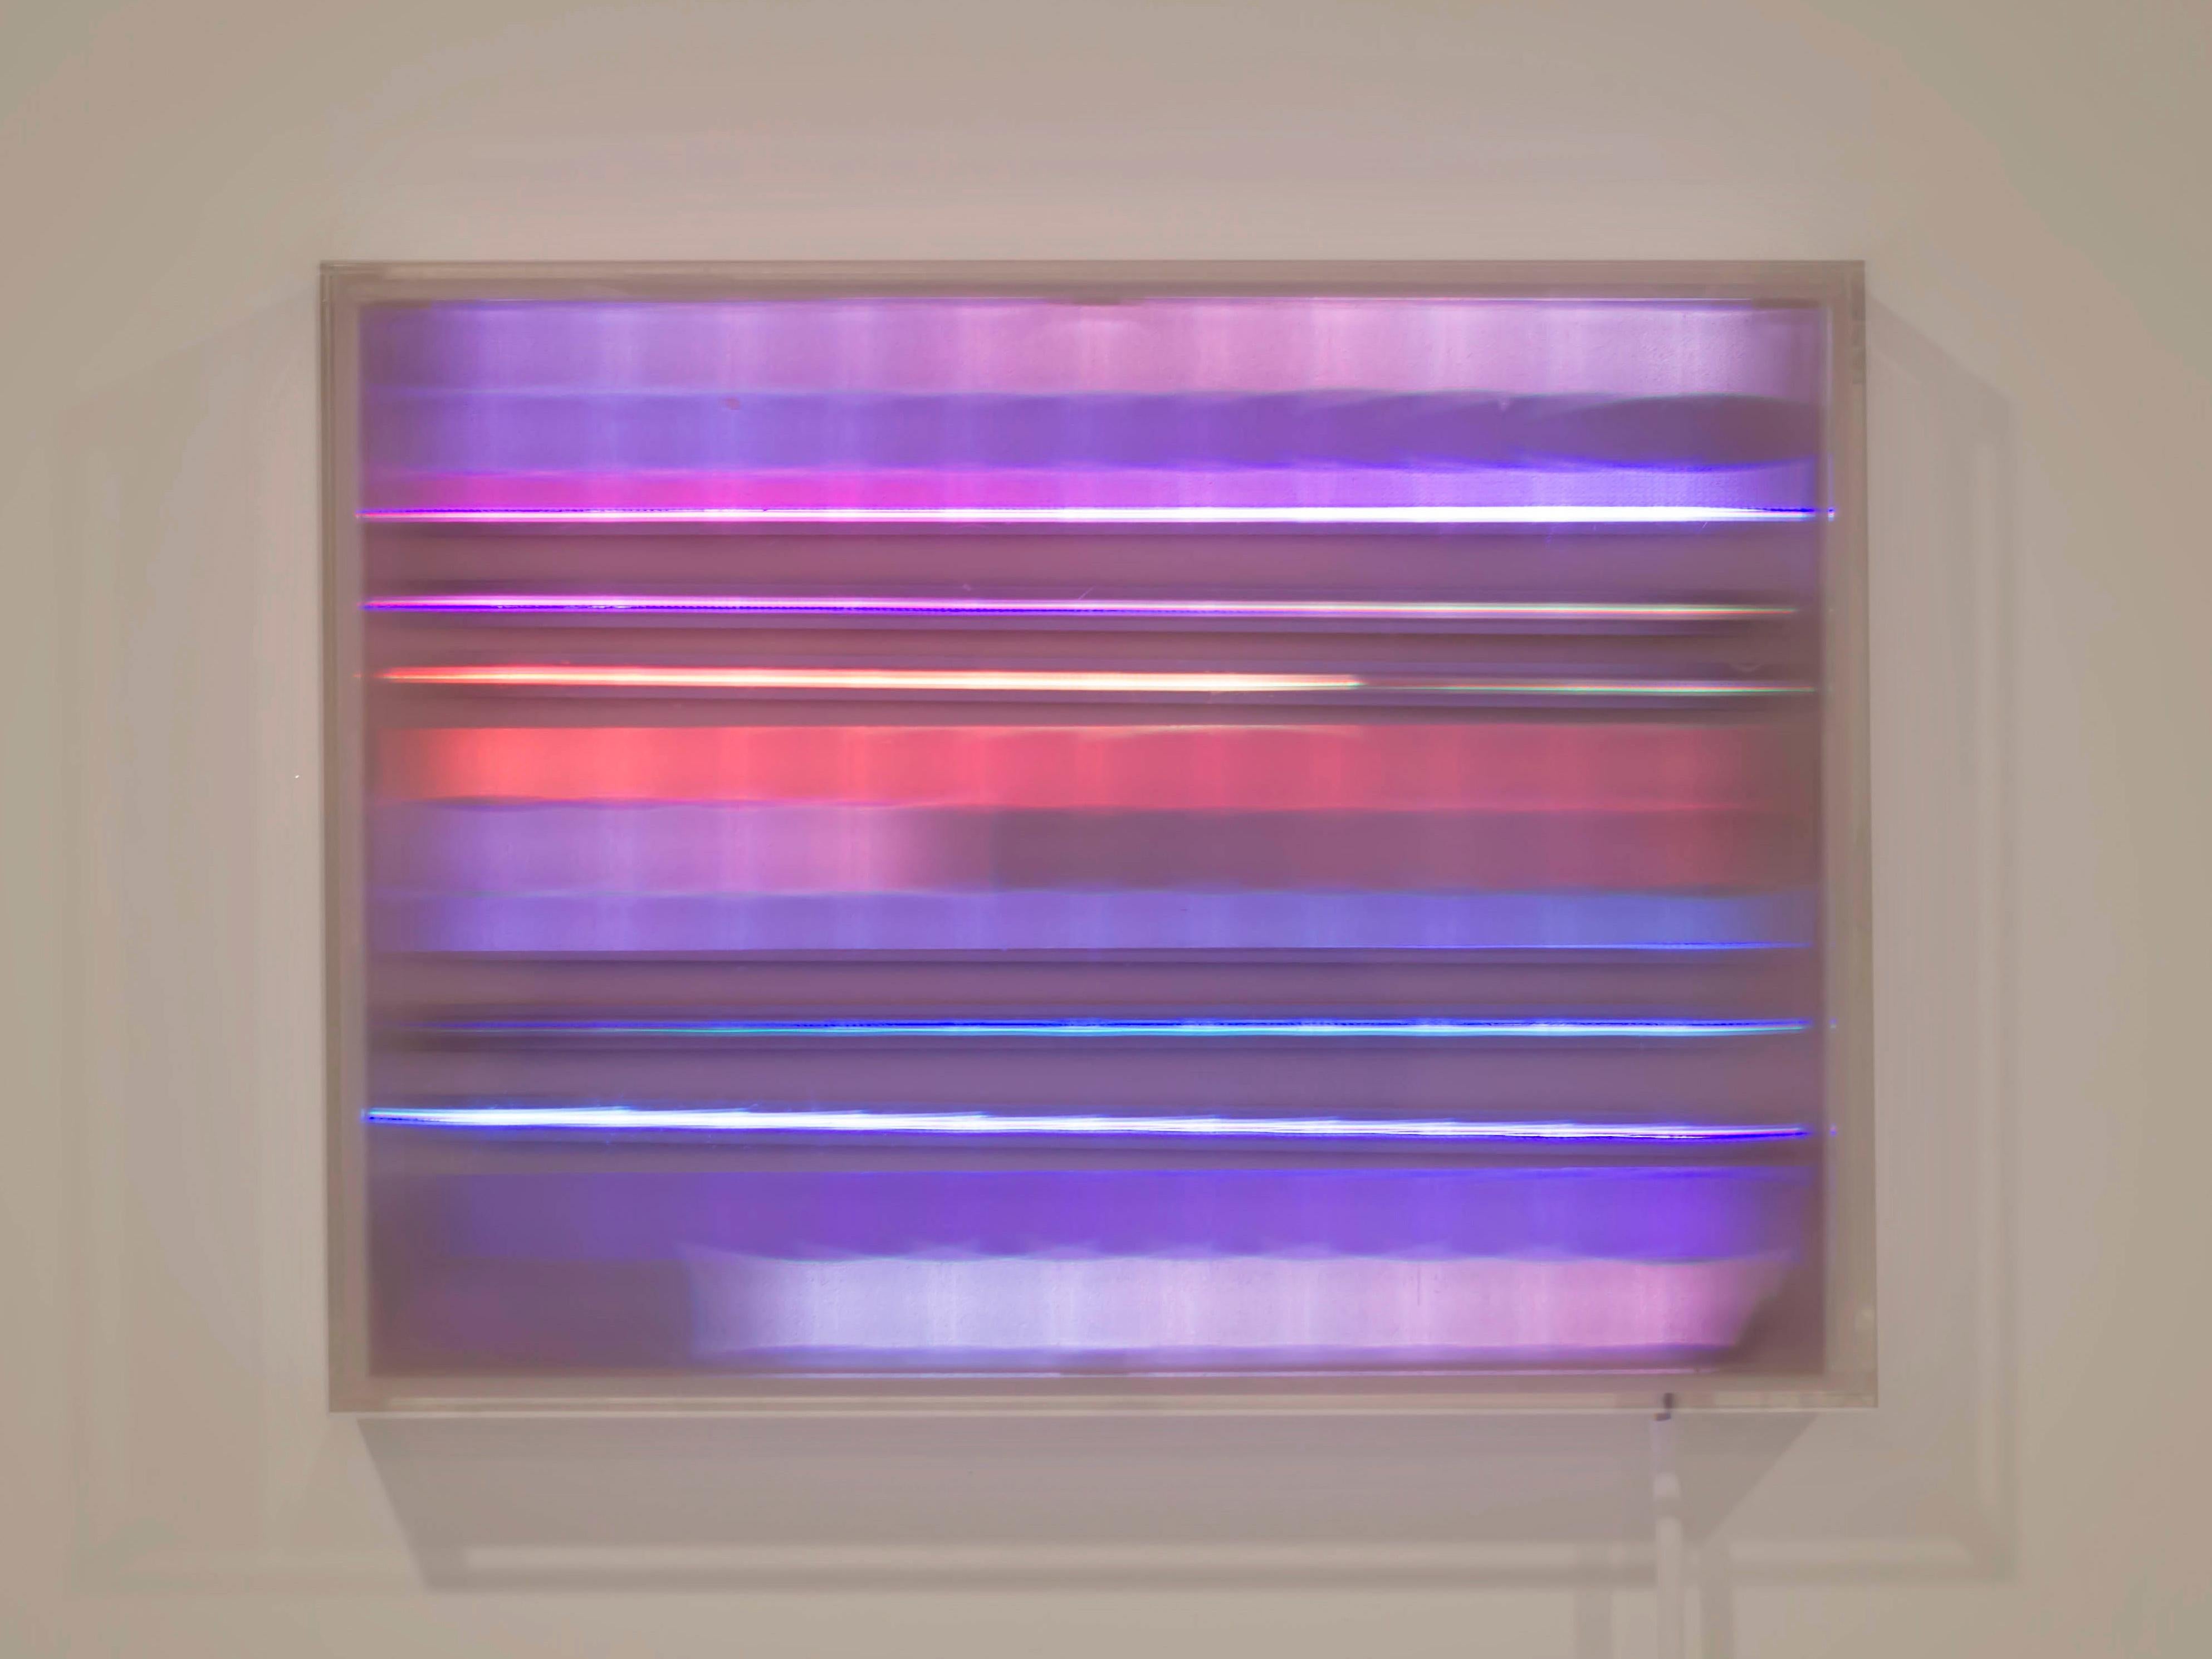 Ebb and Flow - Horizontal stripe, LED Enabled Wall Art, 2021 - Mixed Media Art by Jasmine Pilcher